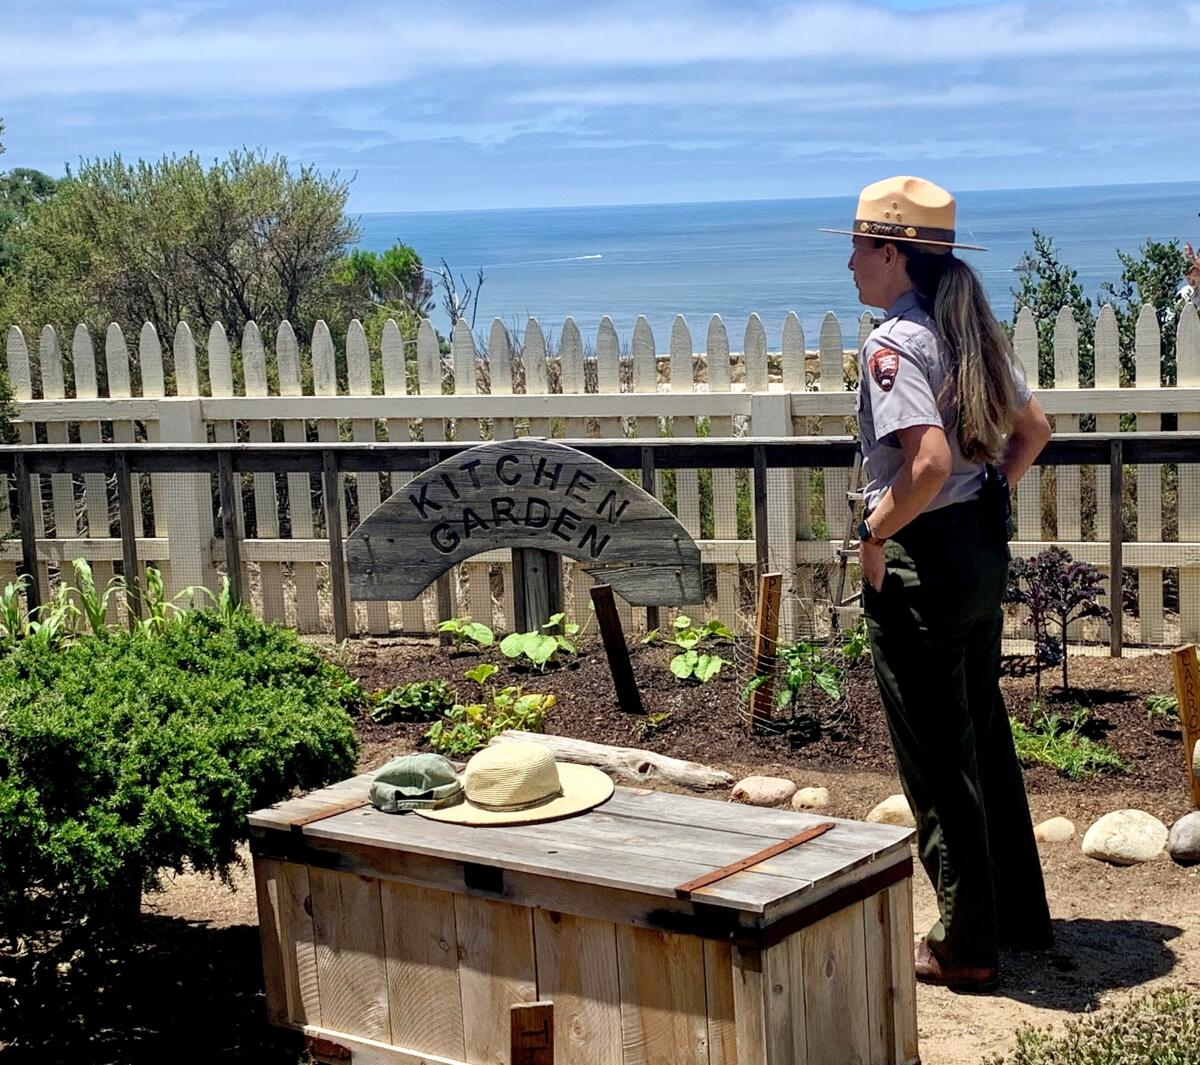 A park ranger stands in the replica kitchen garden at the 1855 Point Loma Lighthouse building at Cabrillo National Monument.